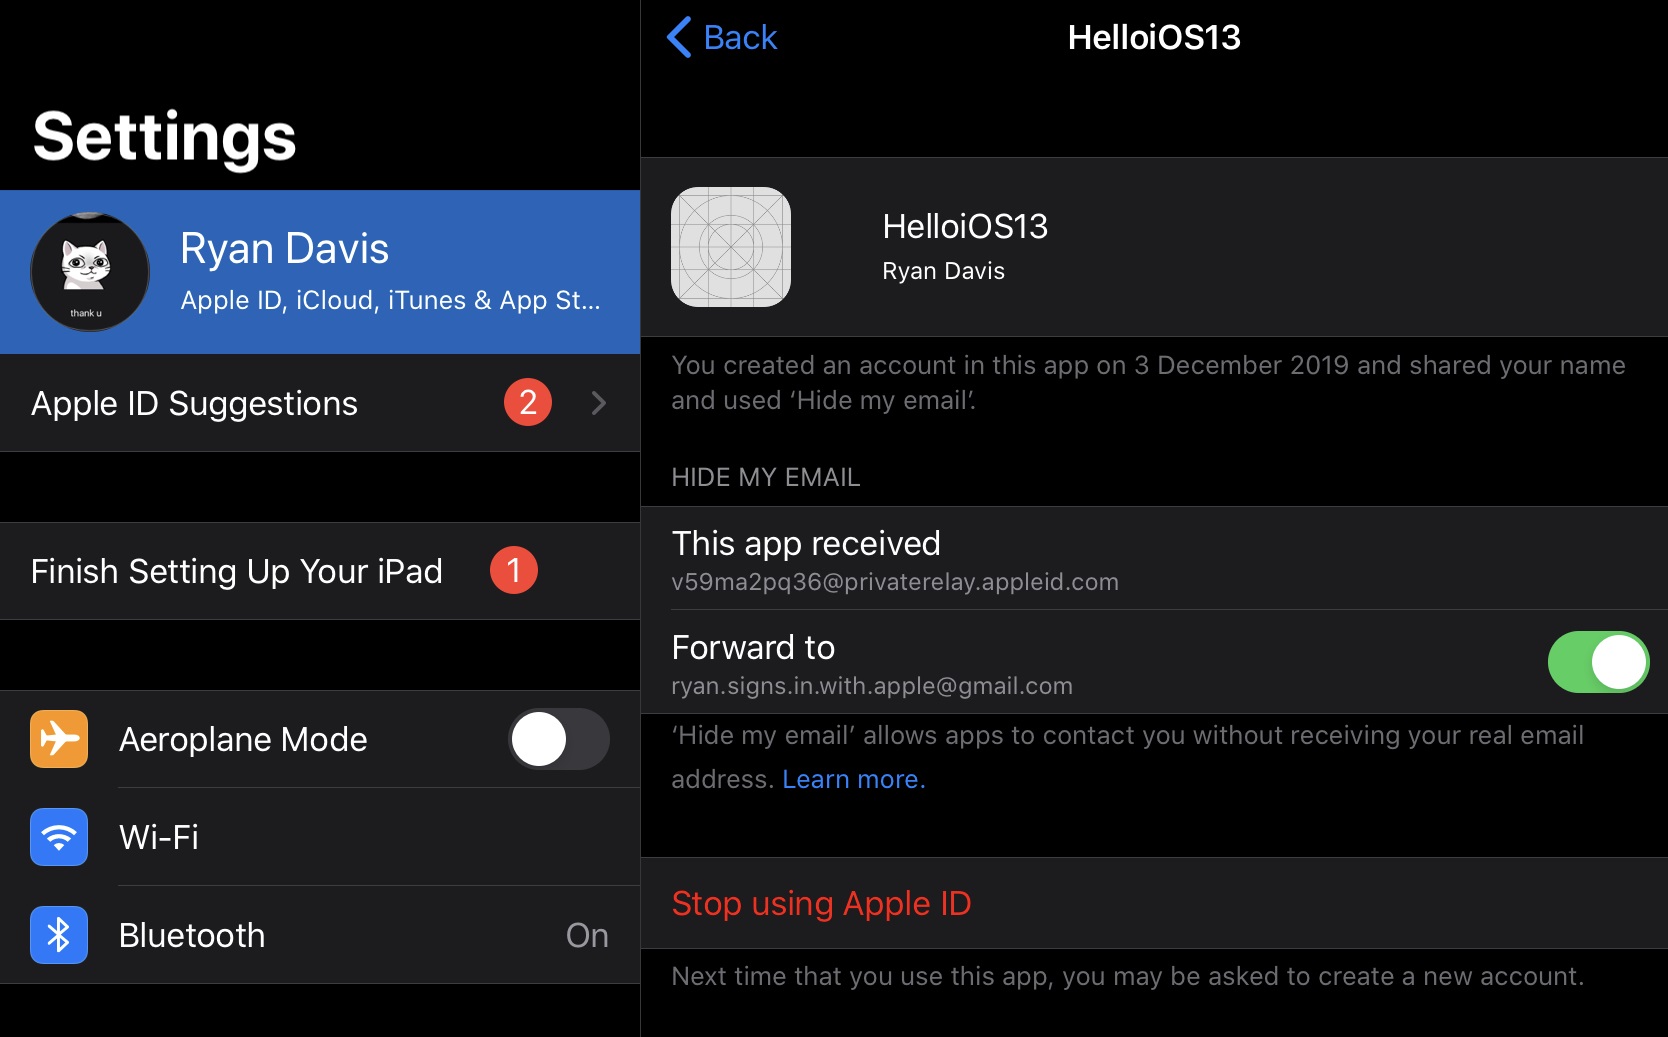 image of the demo app's entry under iCloud Passwords and Security in the iOS Settings app. It shows the relay email address that Apple provided to the developer and includes options that allow the user to either disable email relay, or completely stop using their Apple ID with the app.